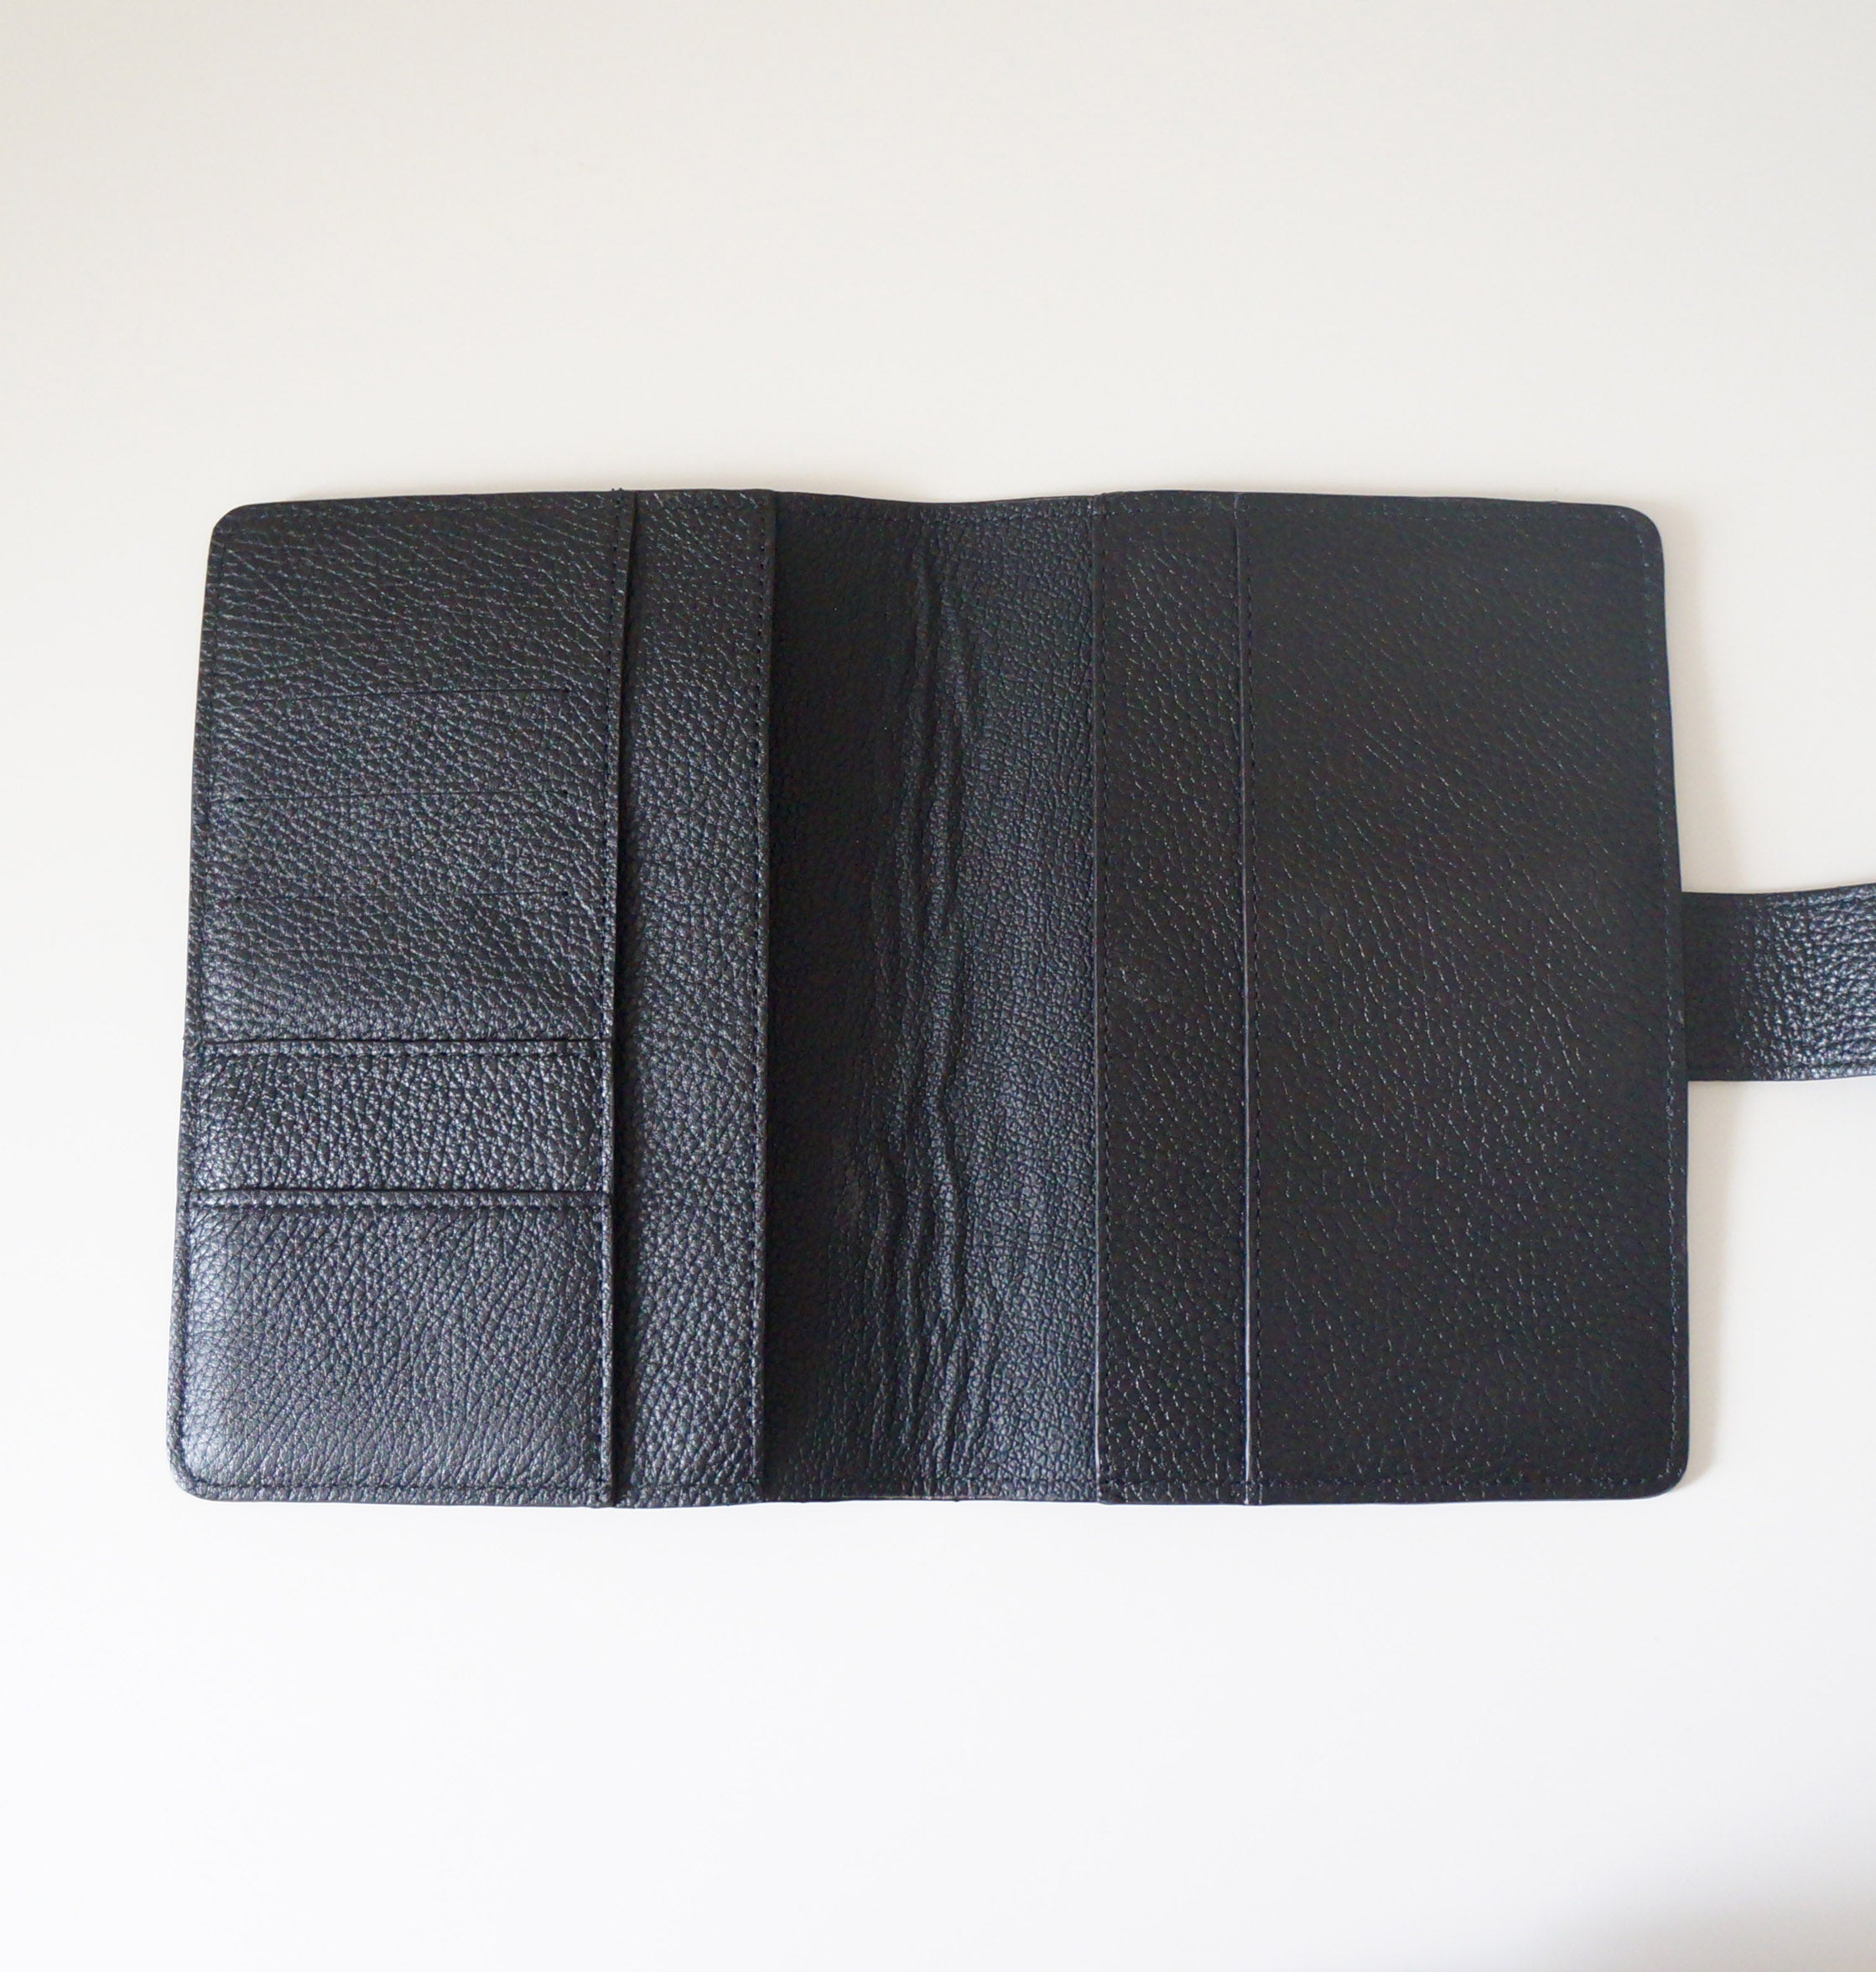 B6 Journal Cover - Jet Black silver snap